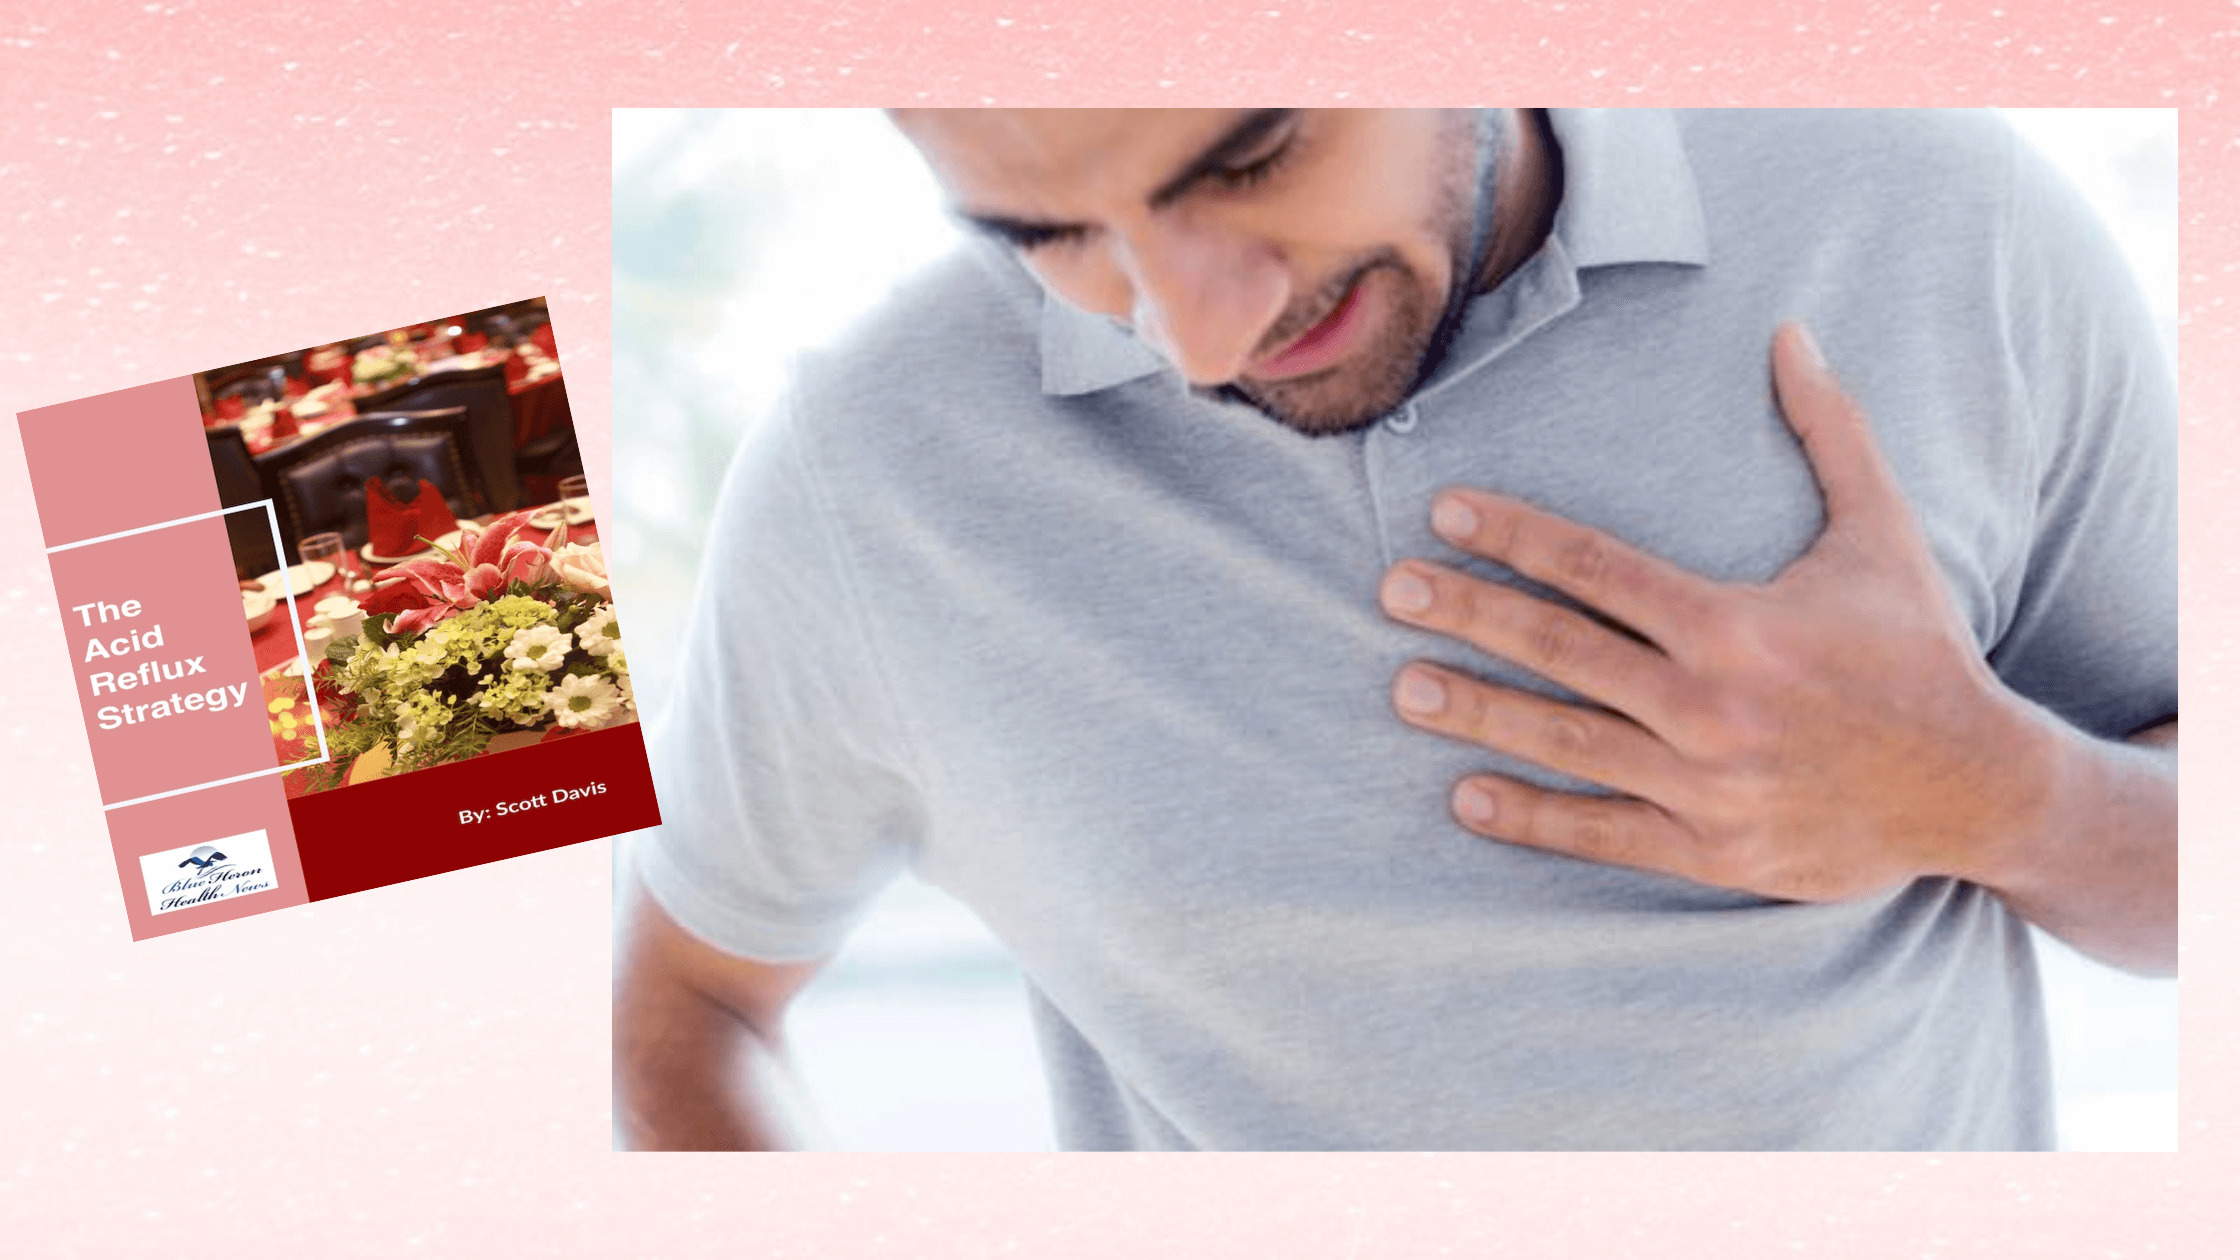 The Acid Reflux Strategy Digital guide